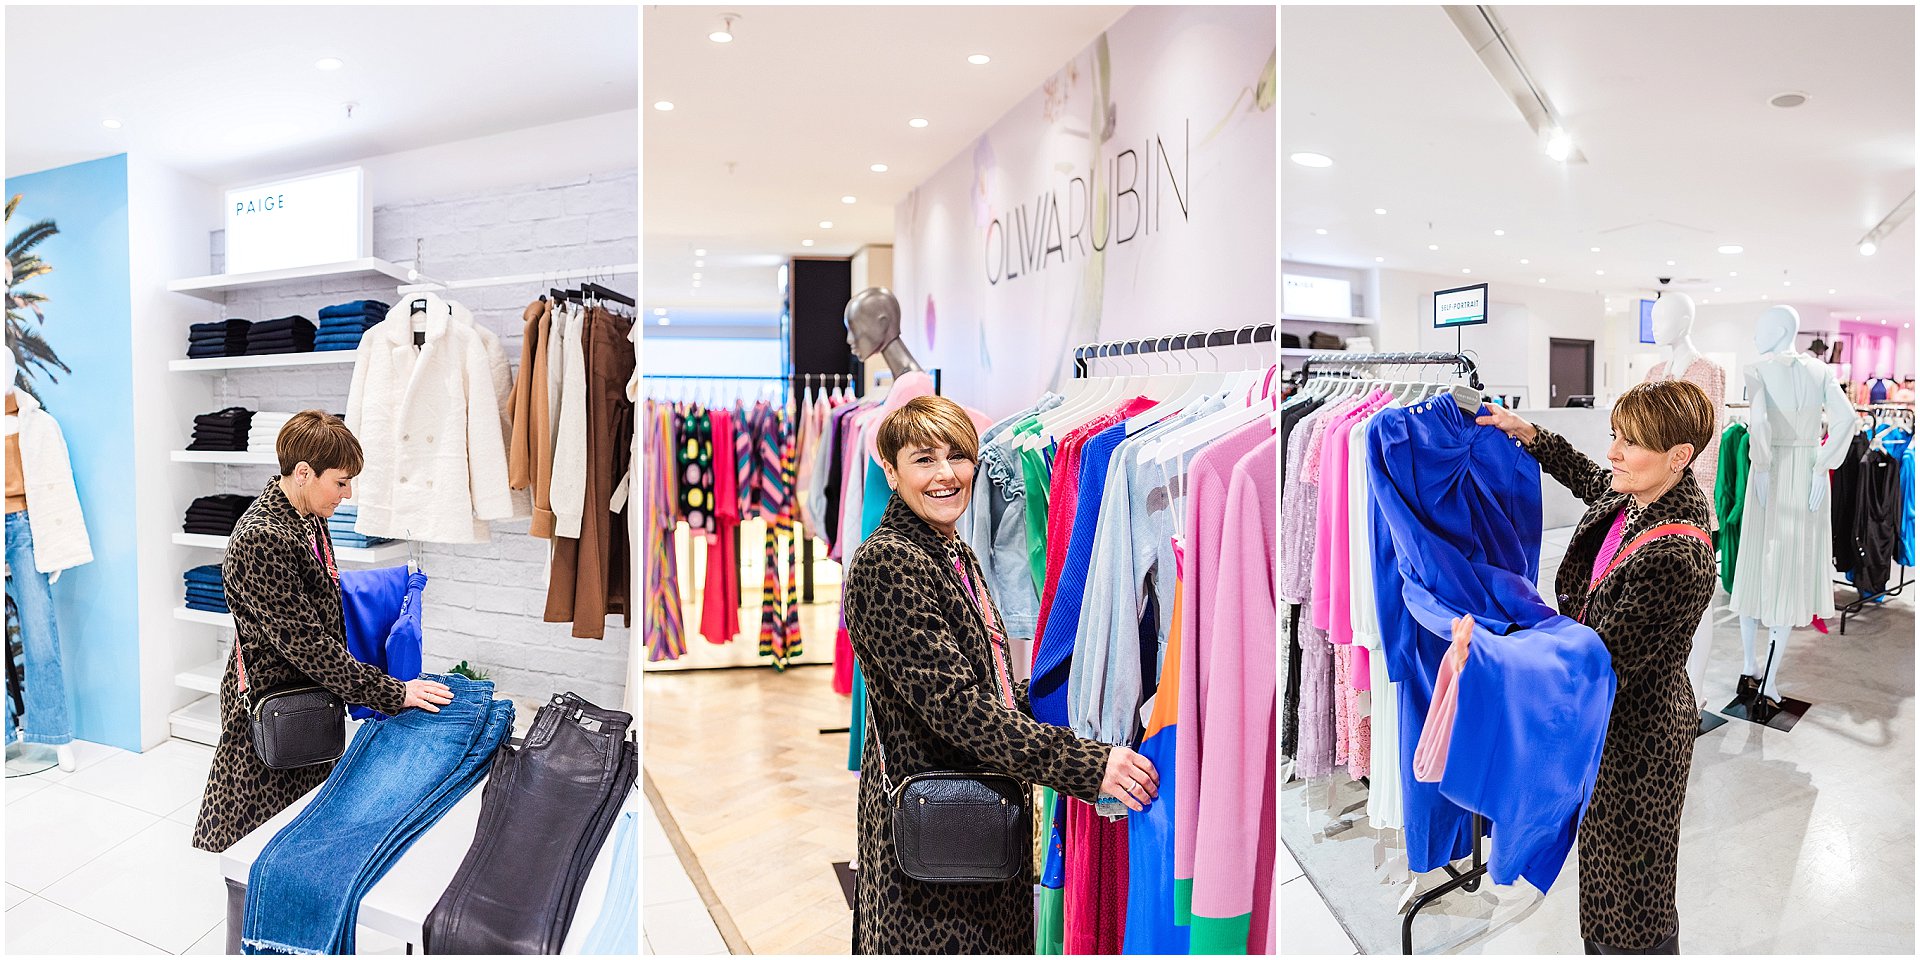 Stylist choosing outfits in a department store to help a client with what to wear on their brand shoot. Images by London brand photographer AKP Branding Stories